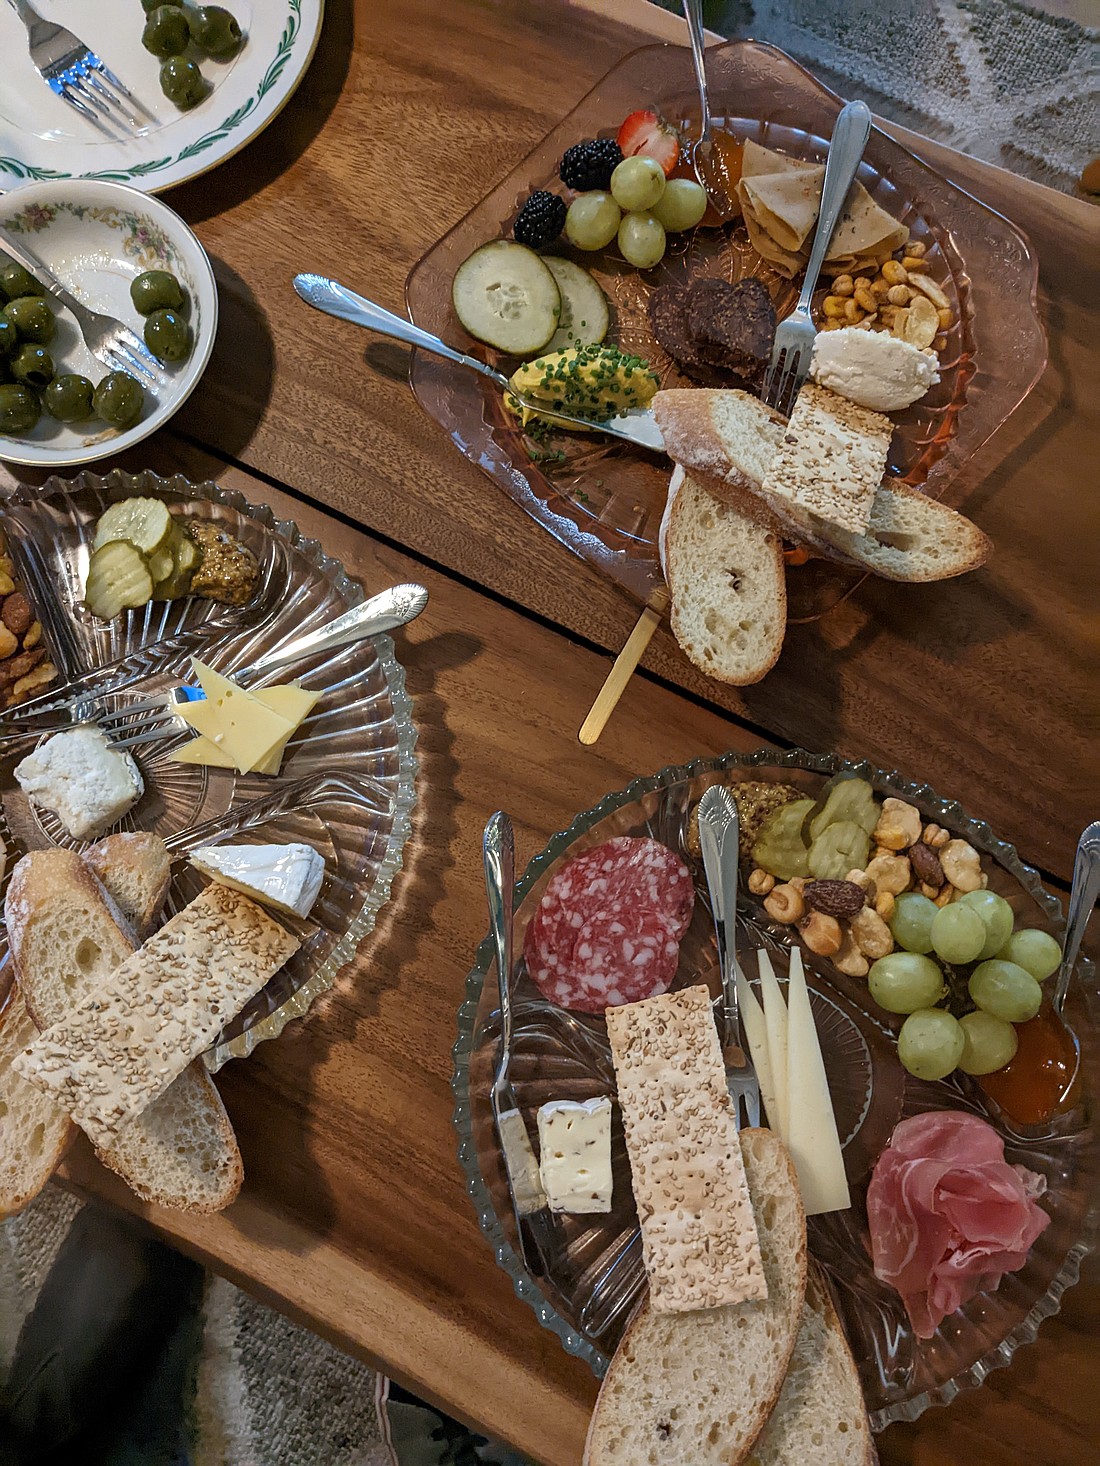 At Nomad Charcuterie and Wine, the namesake boards are split into three categories. Served with cheese-and-wine classics — cured meats, olives, nuts and caviar — diners can choose from vegan, cheese, or cheese and meat. The different cheeses on each make for a fun game of passing plates around to mix-and-match.